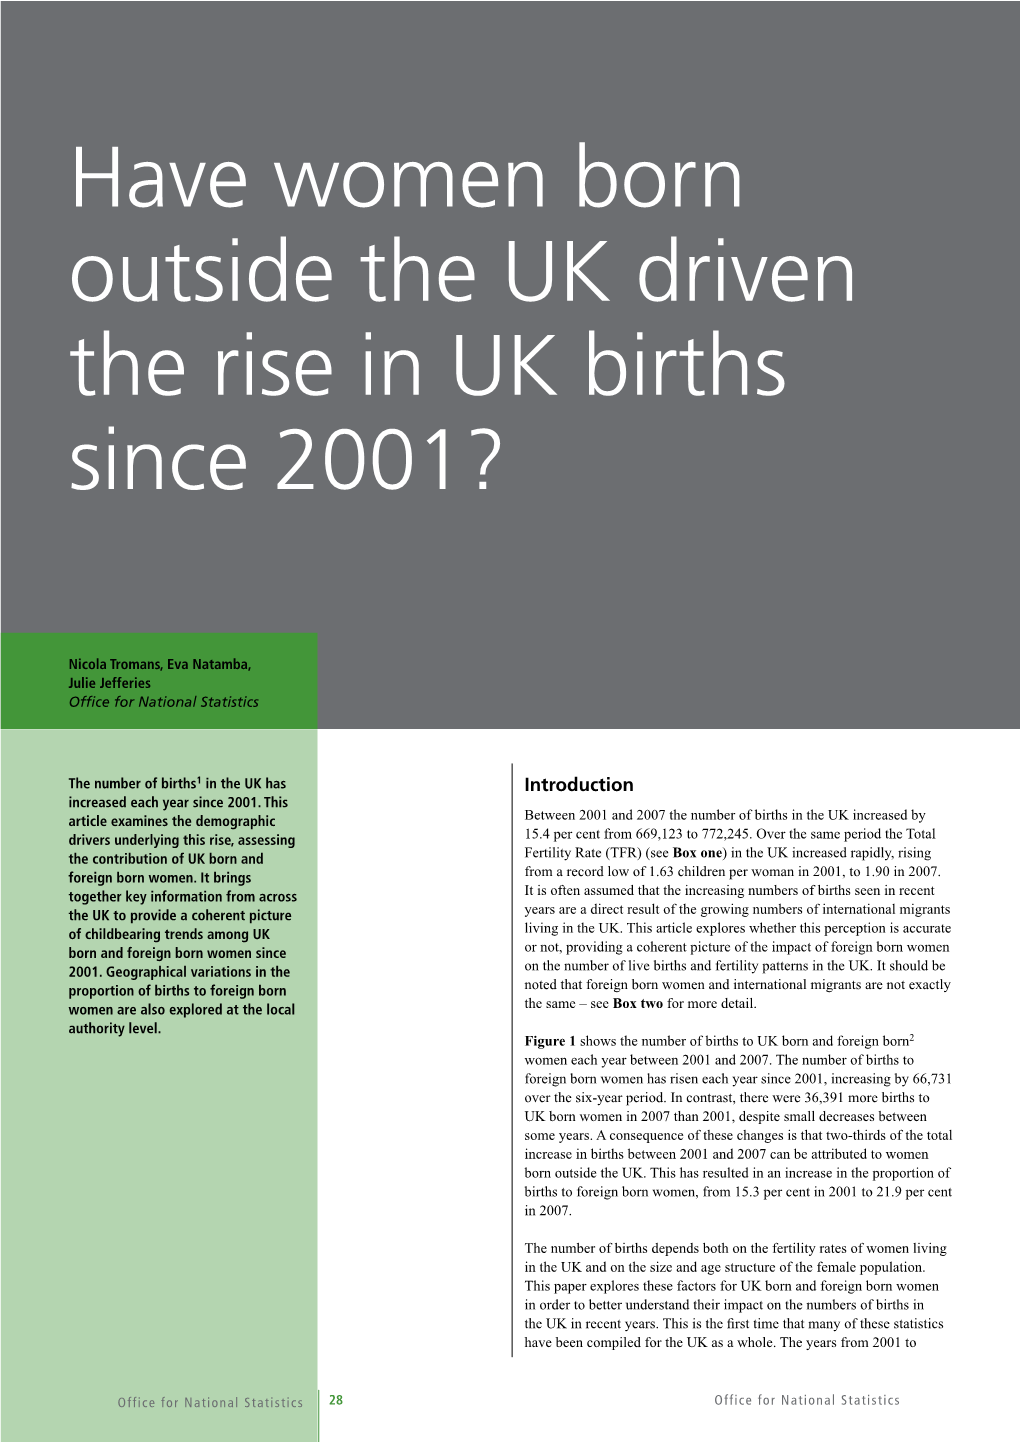 Have Women Born Outside the UK Driven the Rise in UK Births Since 2001?